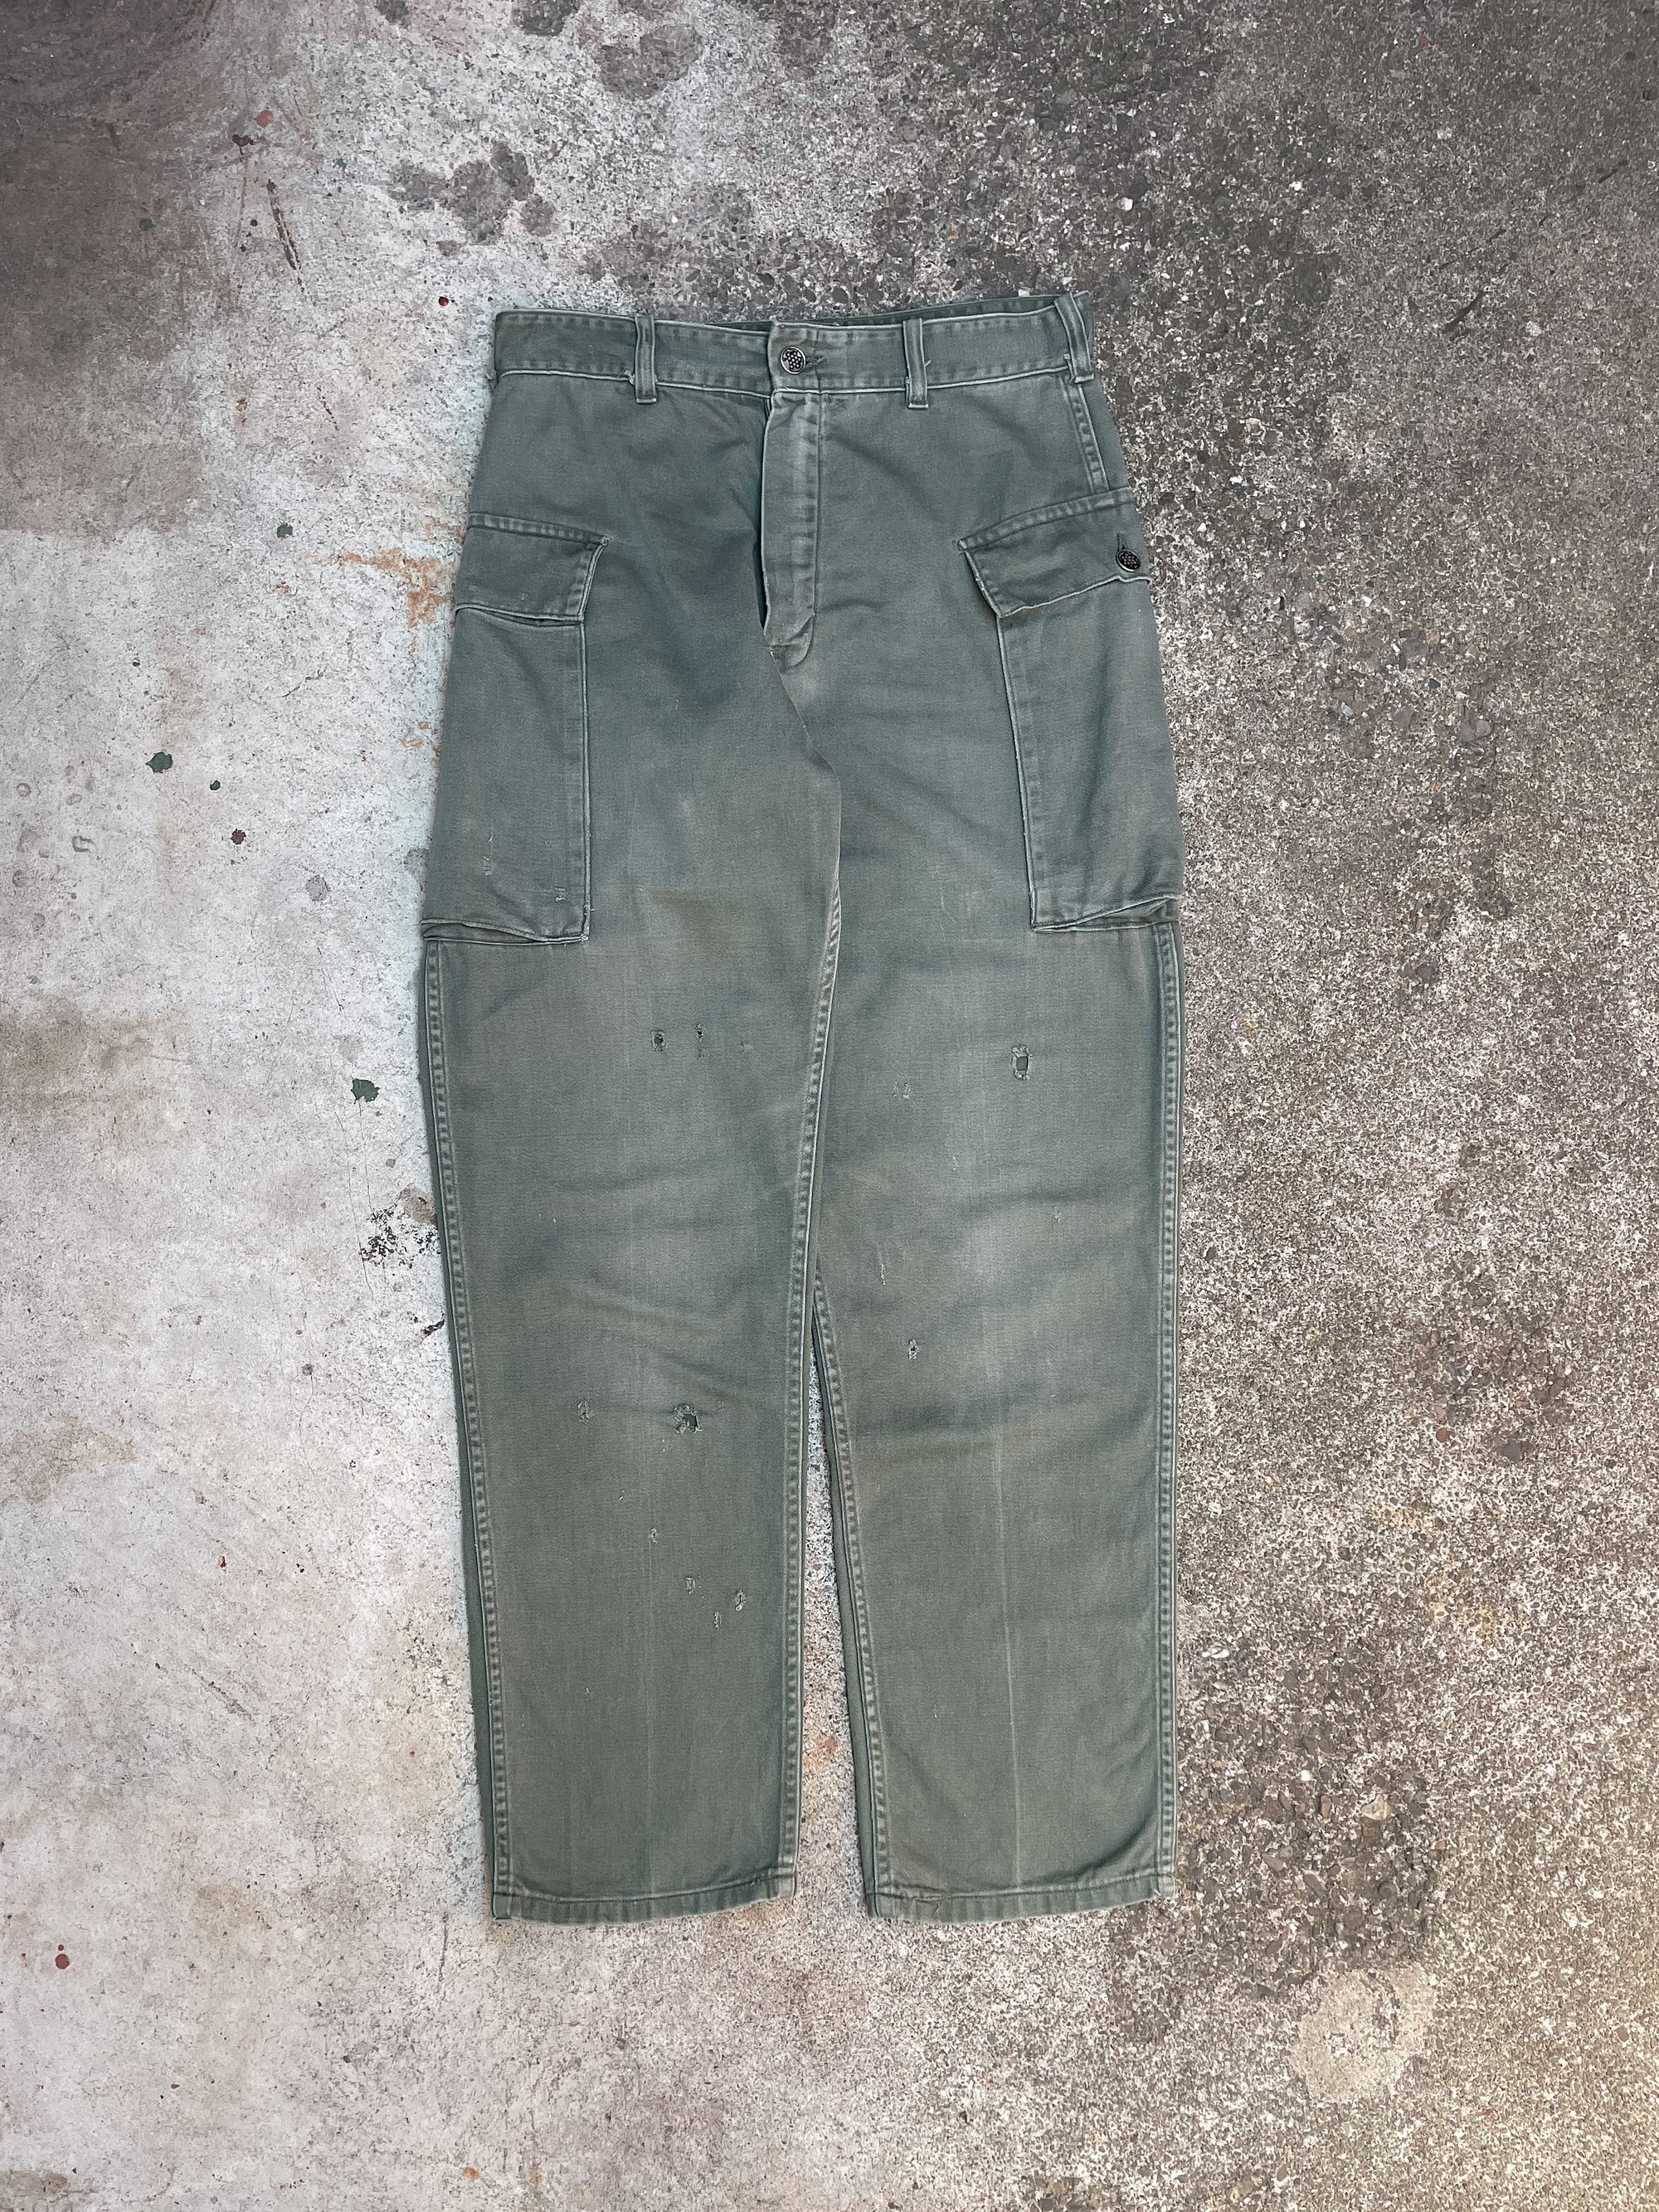 1950s Faded 13-Star Military Cargo Field Pants (28X29)